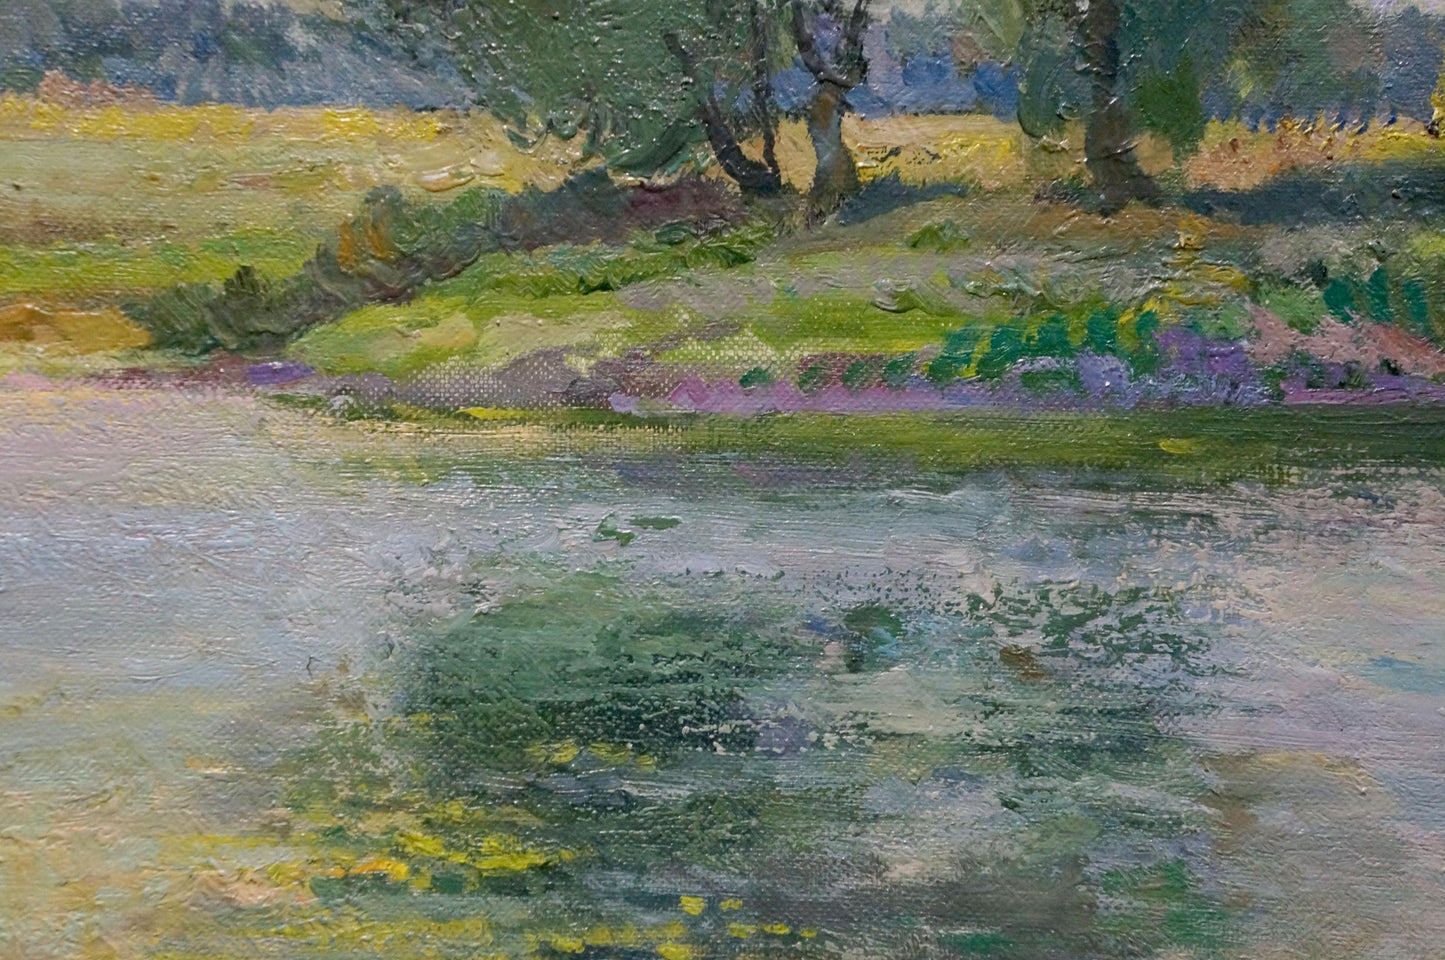 A picturesque scene after the rain captured in oil by Alexander Minka